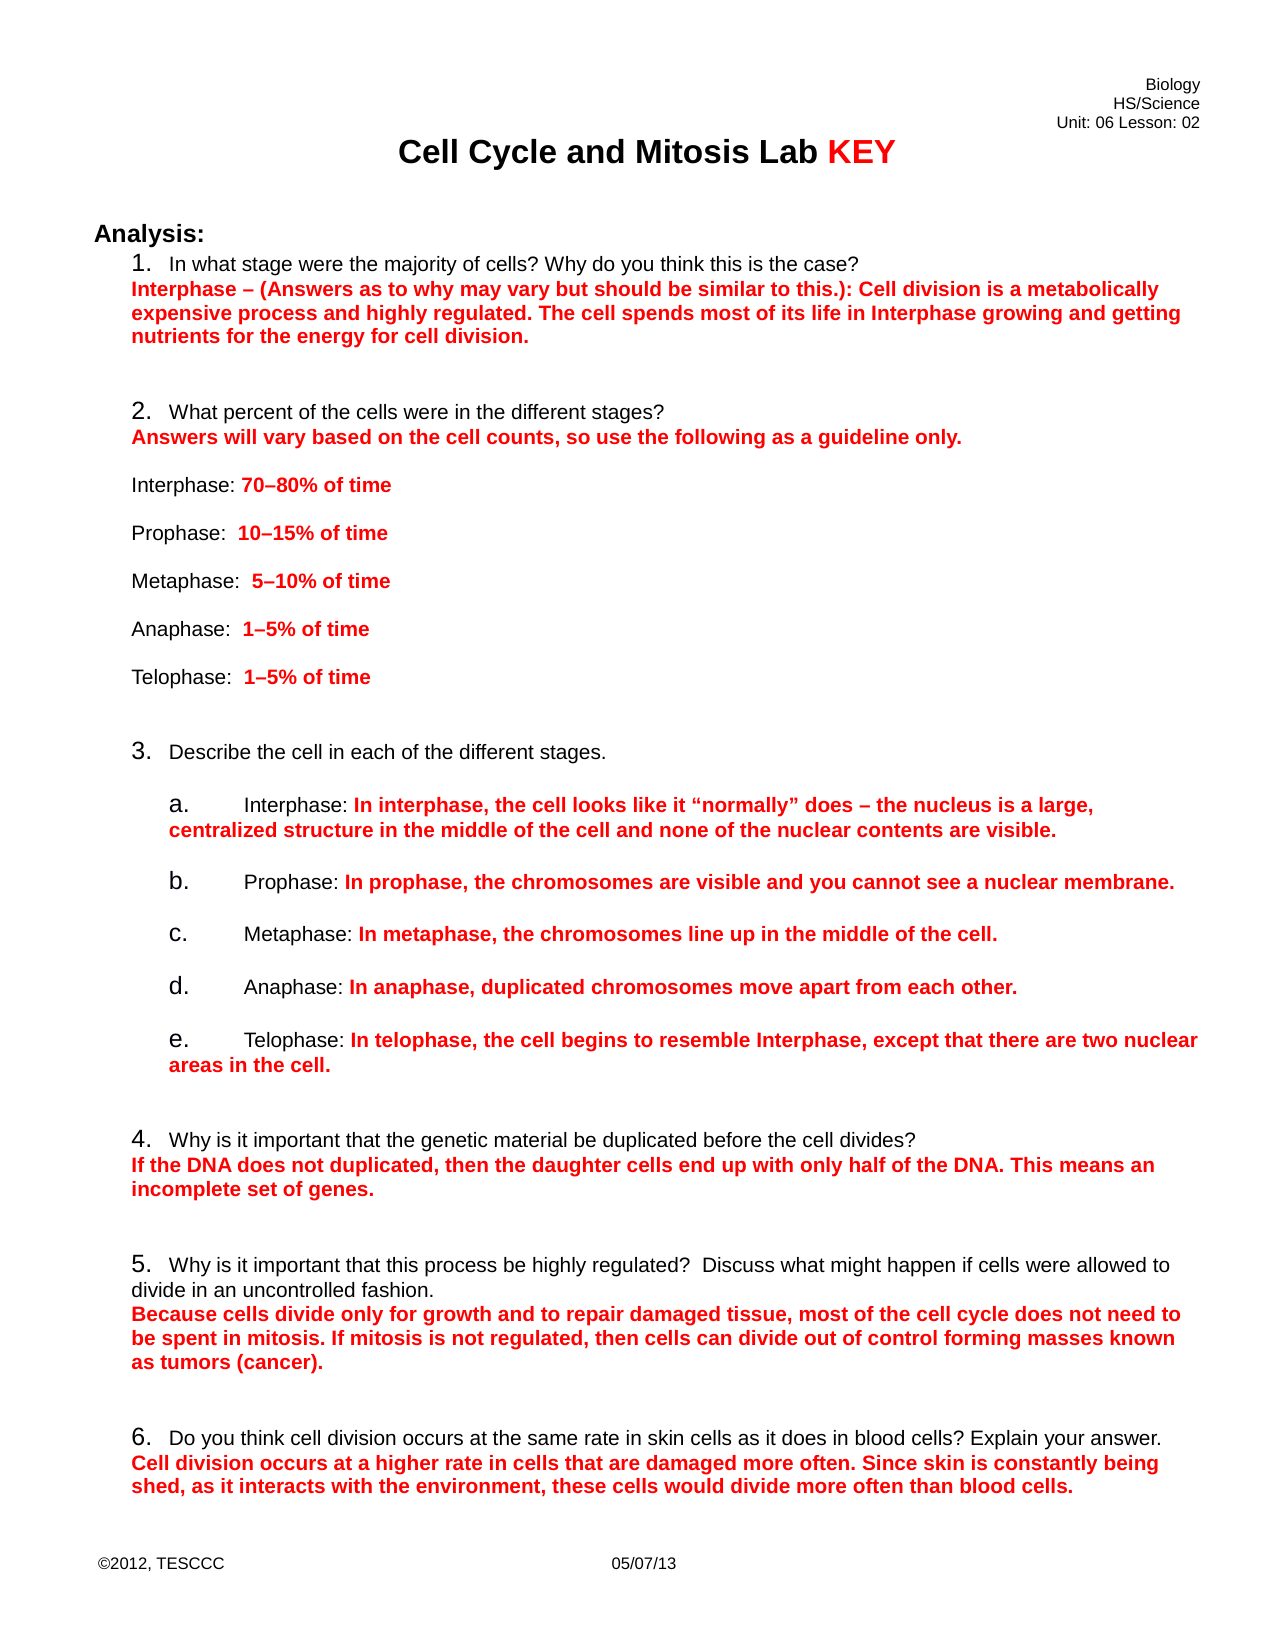 Cell Cycle and Mitosis Investigation KEY Inside Cell Cycle Worksheet Answer Key